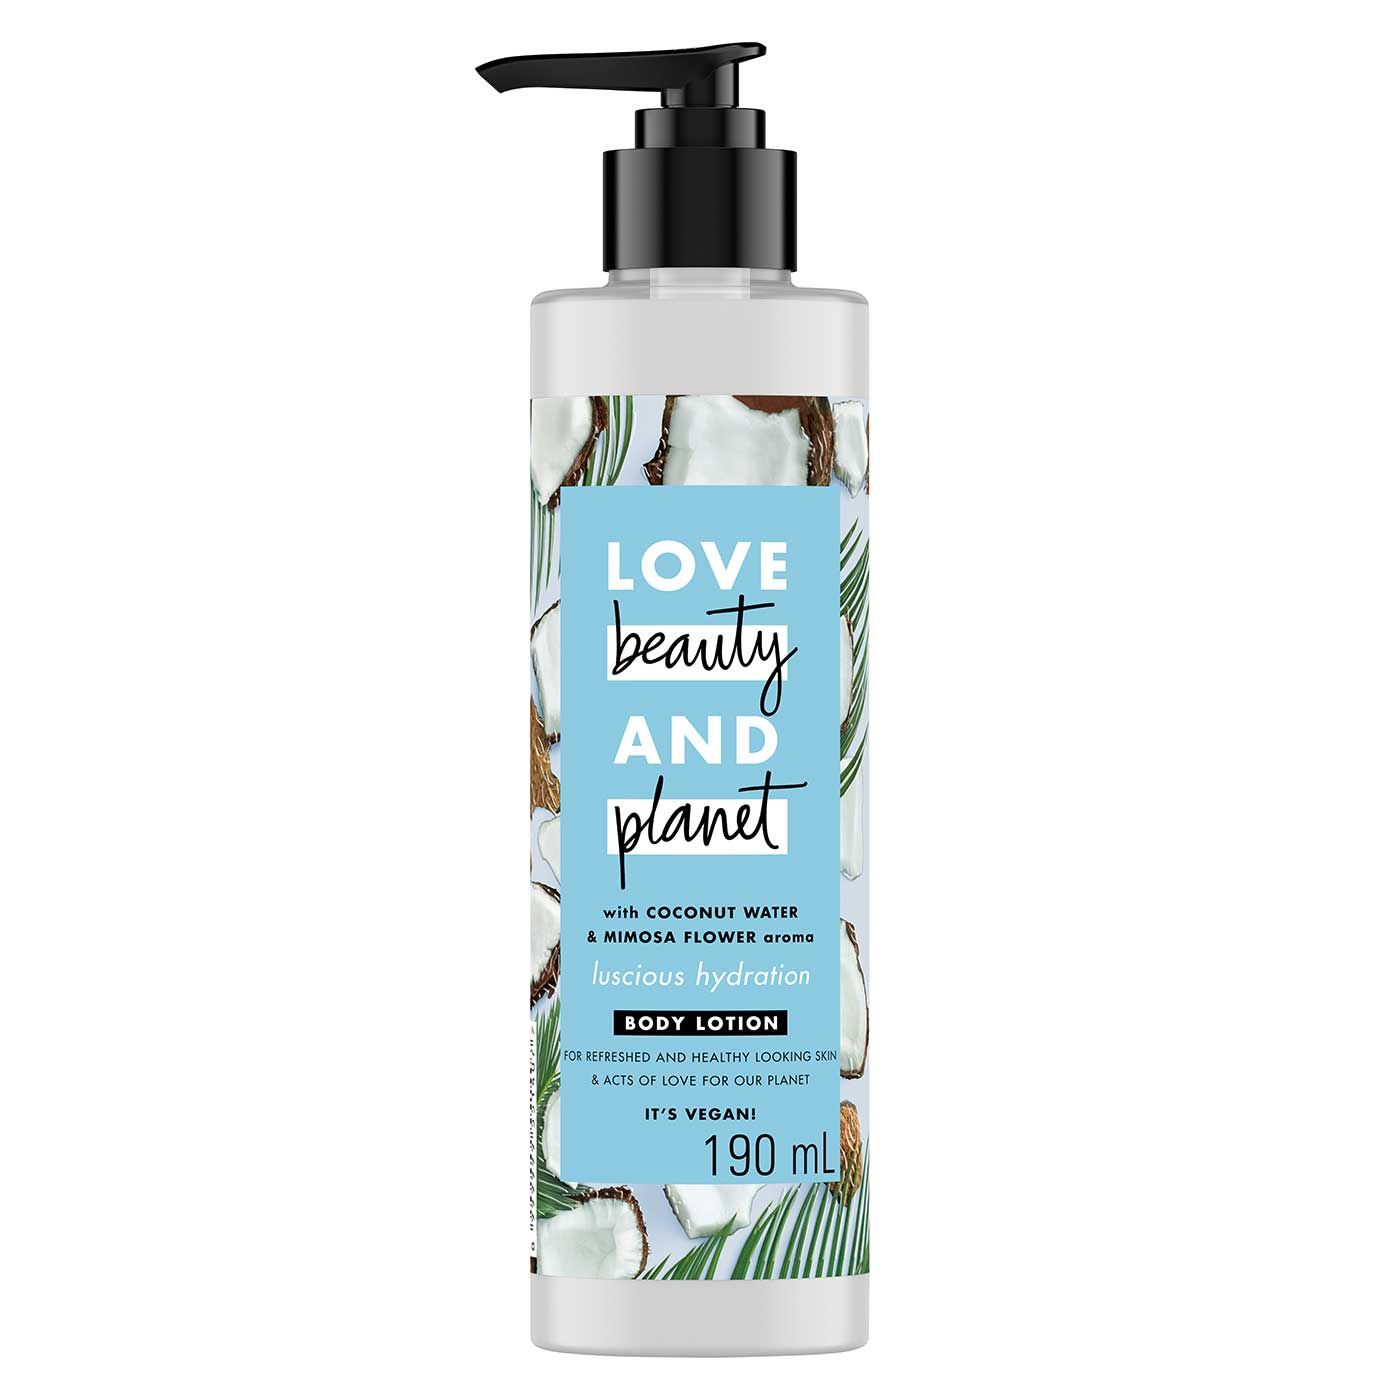 Love Beauty & Planet Luscious Hydration, Coconut Water & Mimosa Flower Body Lotion 190ml - 2